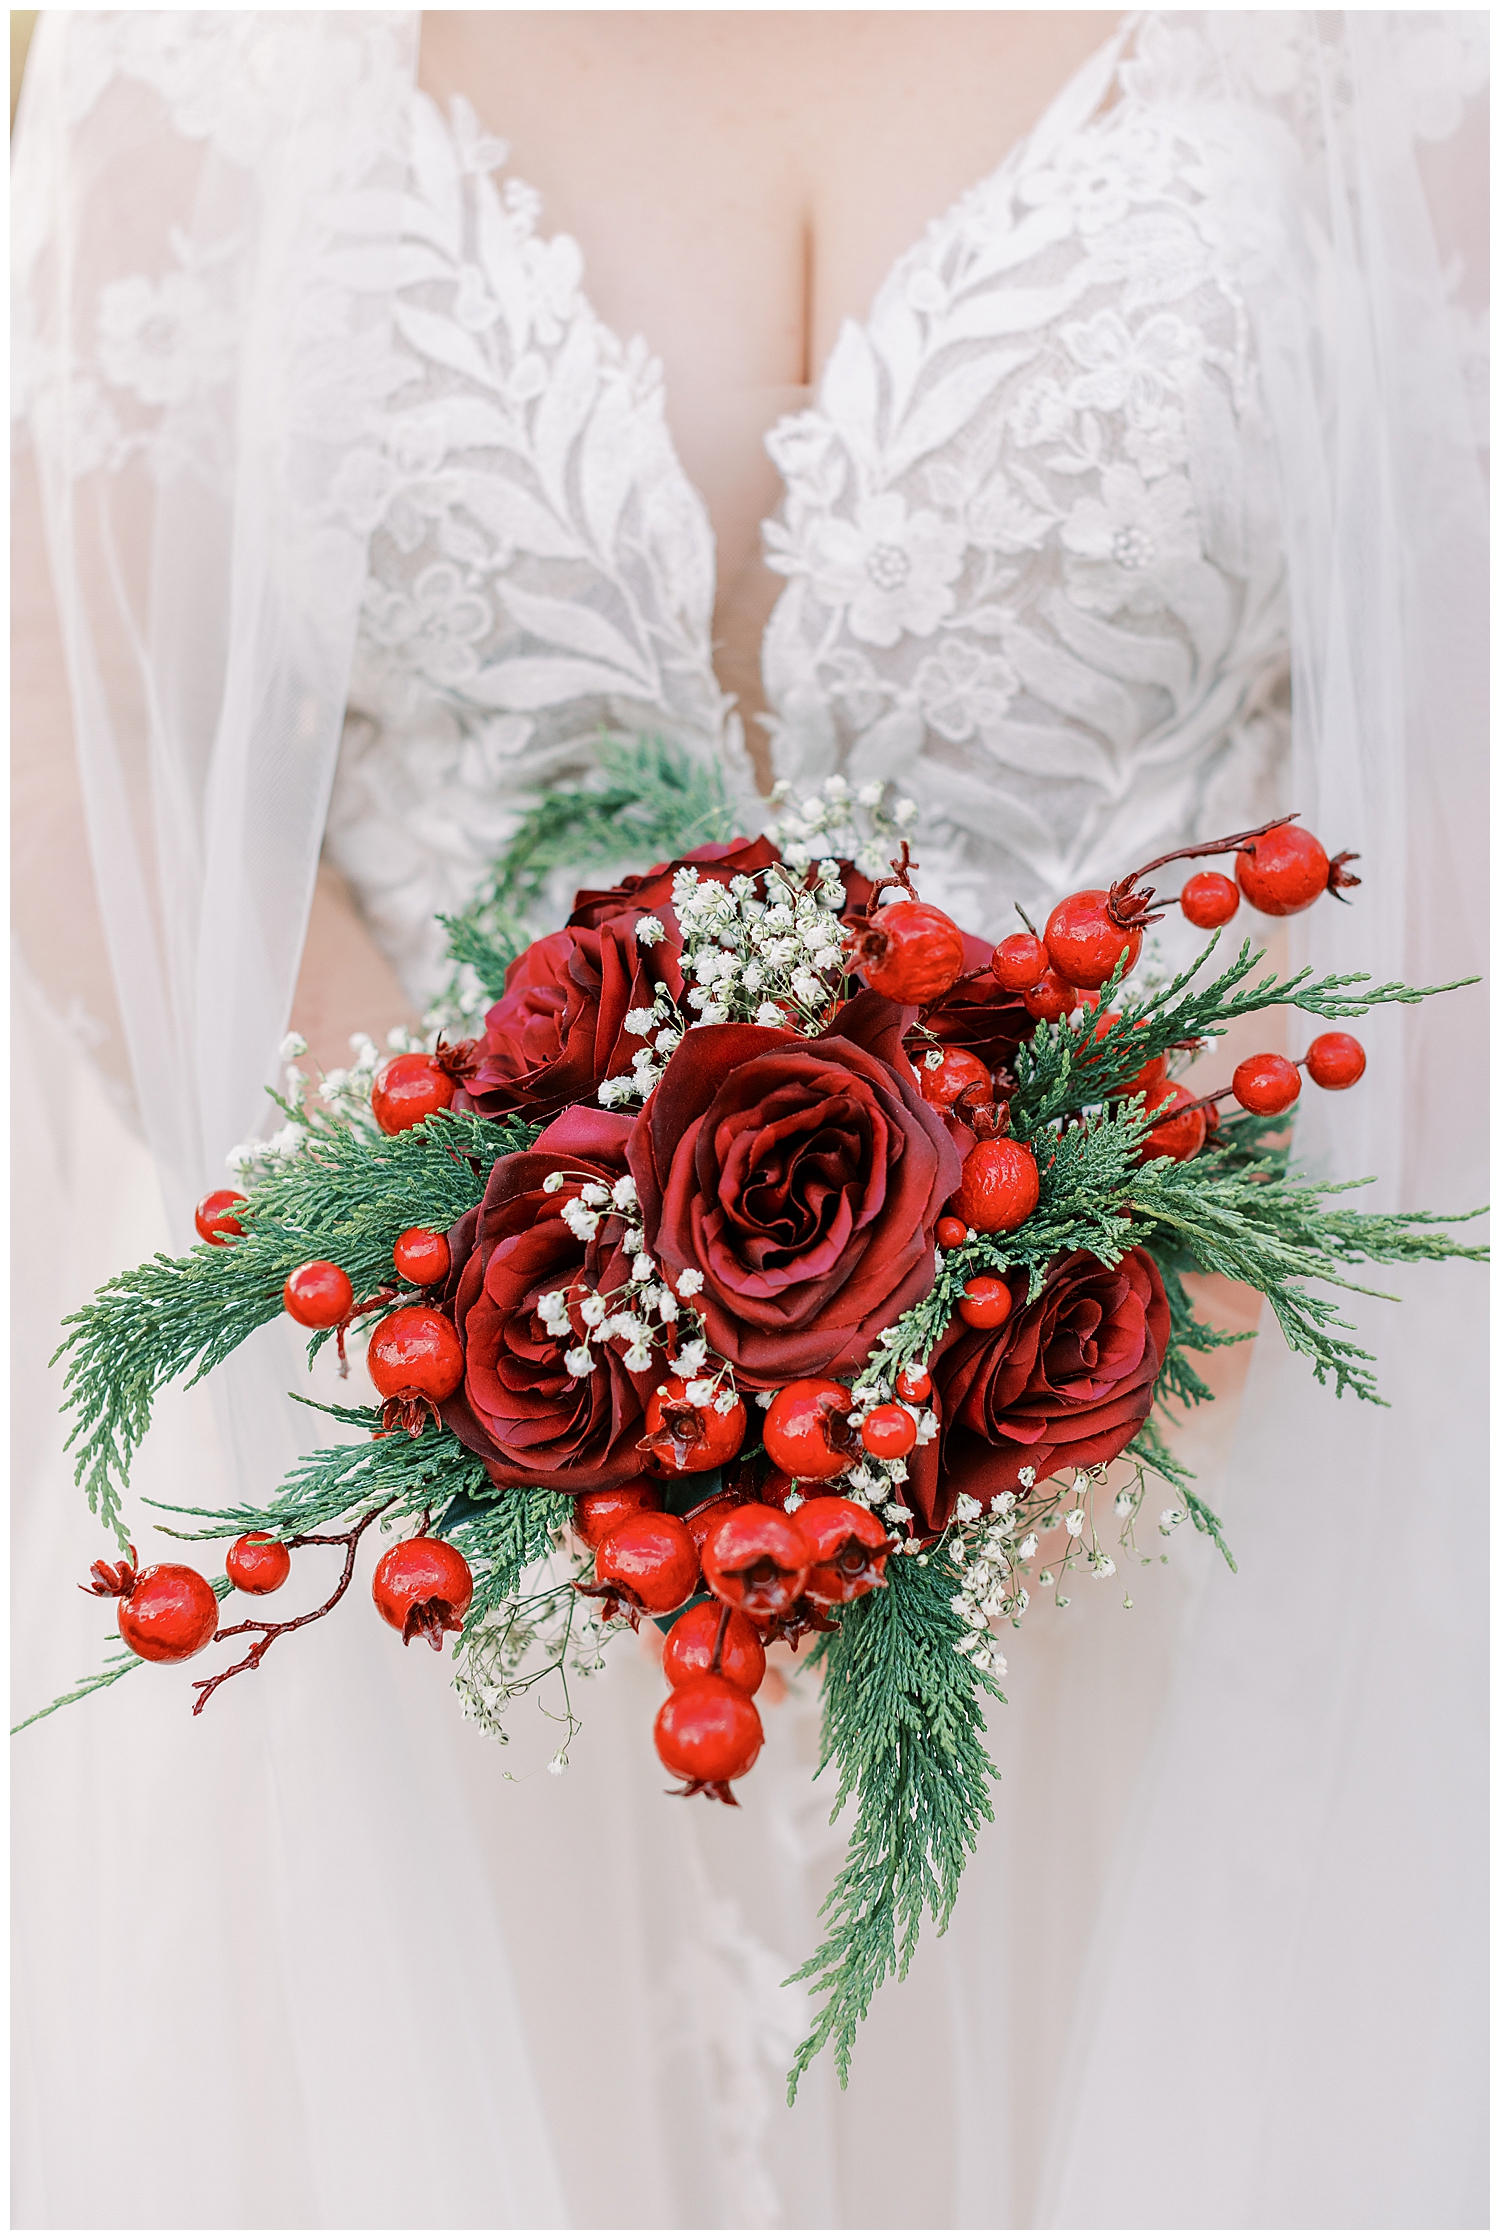 A red and green floral bouquet is held by the bride.